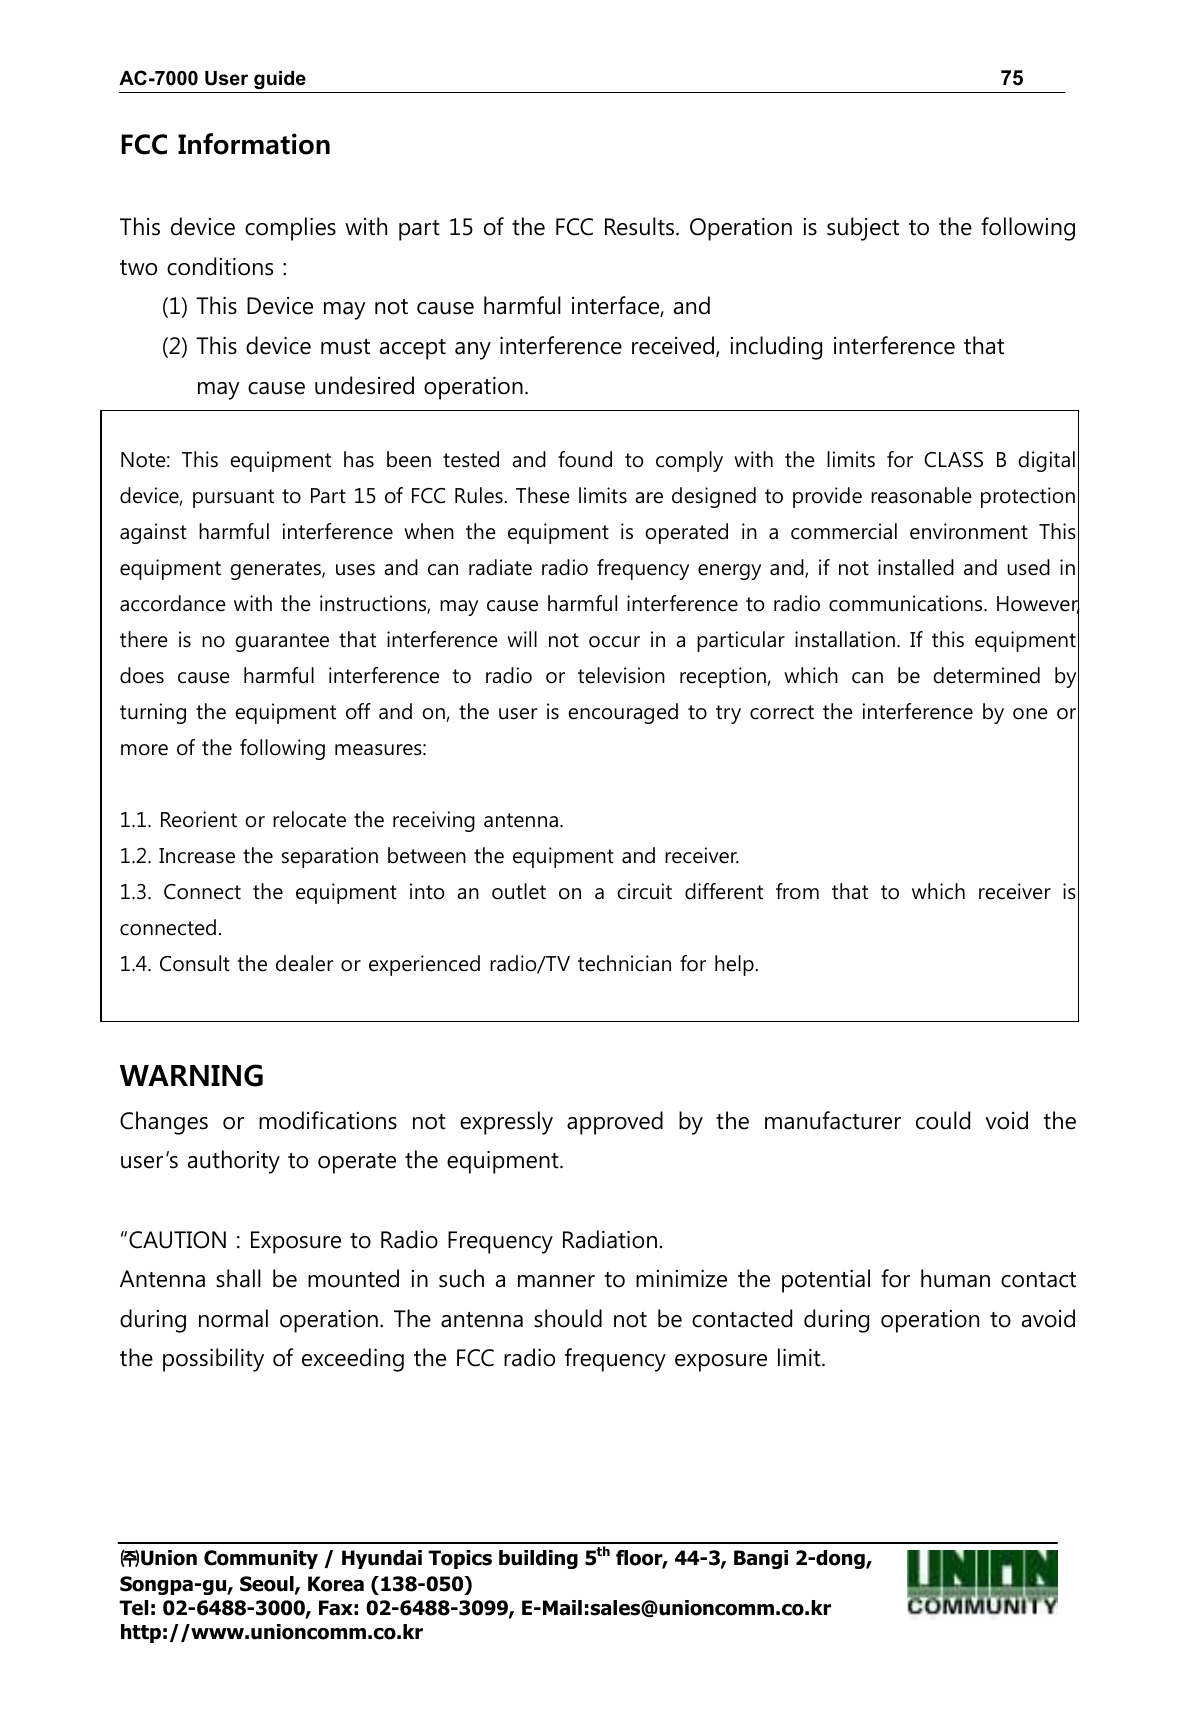 AC-7000 User guide                                                                      75 ㈜㈜㈜㈜Union Community / Hyundai Topics building 5th floor, 44-3, Bangi 2-dong,   Songpa-gu, Seoul, Korea (138-050) Tel: 02-6488-3000, Fax: 02-6488-3099, E-Mail:sales@unioncomm.co.kr http://www.unioncomm.co.kr FCC Information    This device complies with part 15 of the FCC Results. Operation is subject to the following two conditions :   (1) This Device may not cause harmful interface, and     (2) This device must accept any interference received, including interference that           may cause undesired operation.   Note:  This  equipment  has  been  tested  and  found  to  comply  with  the  limits  for  CLASS  B  digital device, pursuant to Part 15 of FCC Rules. These limits are designed to provide reasonable protection against  harmful  interference  when  the  equipment  is  operated  in  a  commercial  environment  This equipment generates, uses and can radiate radio frequency energy and, if not installed and used in accordance with the instructions, may cause harmful interference to radio communications. However, there is no guarantee that interference will not occur in a particular installation. If this equipment does  cause  harmful  interference  to  radio  or  television  reception,  which  can  be  determined  by turning the equipment off and on, the user is encouraged to try correct the interference by one or more of the following measures:    1.1. Reorient or relocate the receiving antenna. 1.2. Increase the separation between the equipment and receiver. 1.3.  Connect  the  equipment  into  an  outlet  on  a  circuit  different  from  that  to  which  receiver  is connected. 1.4. Consult the dealer or experienced radio/TV technician for help.   WARNING Changes  or  modifications  not  expressly  approved  by  the  manufacturer  could  void  the user’s authority to operate the equipment.  “CAUTION : Exposure to Radio Frequency Radiation. Antenna shall be mounted in such a manner to minimize the potential for human contact during normal operation. The antenna should not be contacted during operation to avoid the possibility of exceeding the FCC radio frequency exposure limit.  